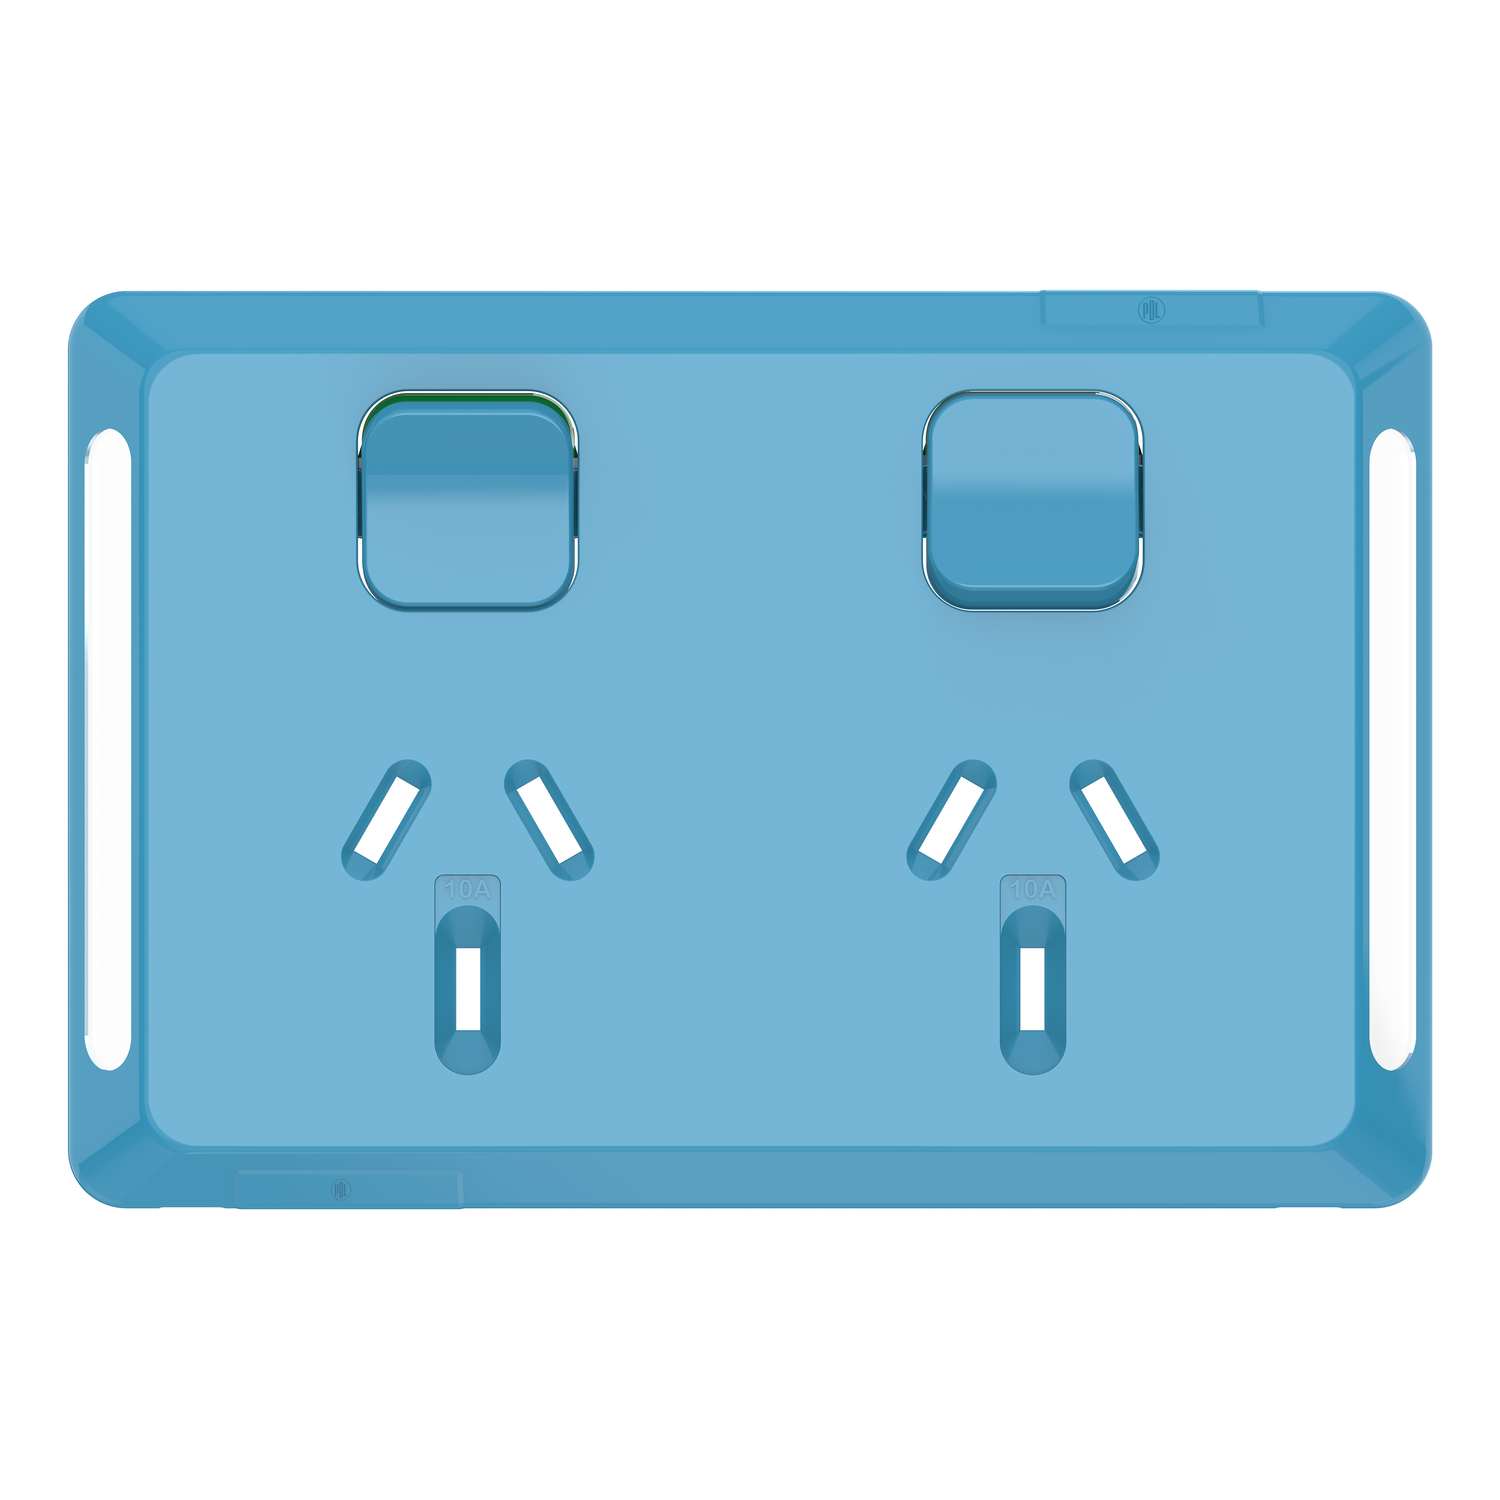 PDL Pro Series - Cover Plate Double Swiched Socket 10A Horizontal - Blue